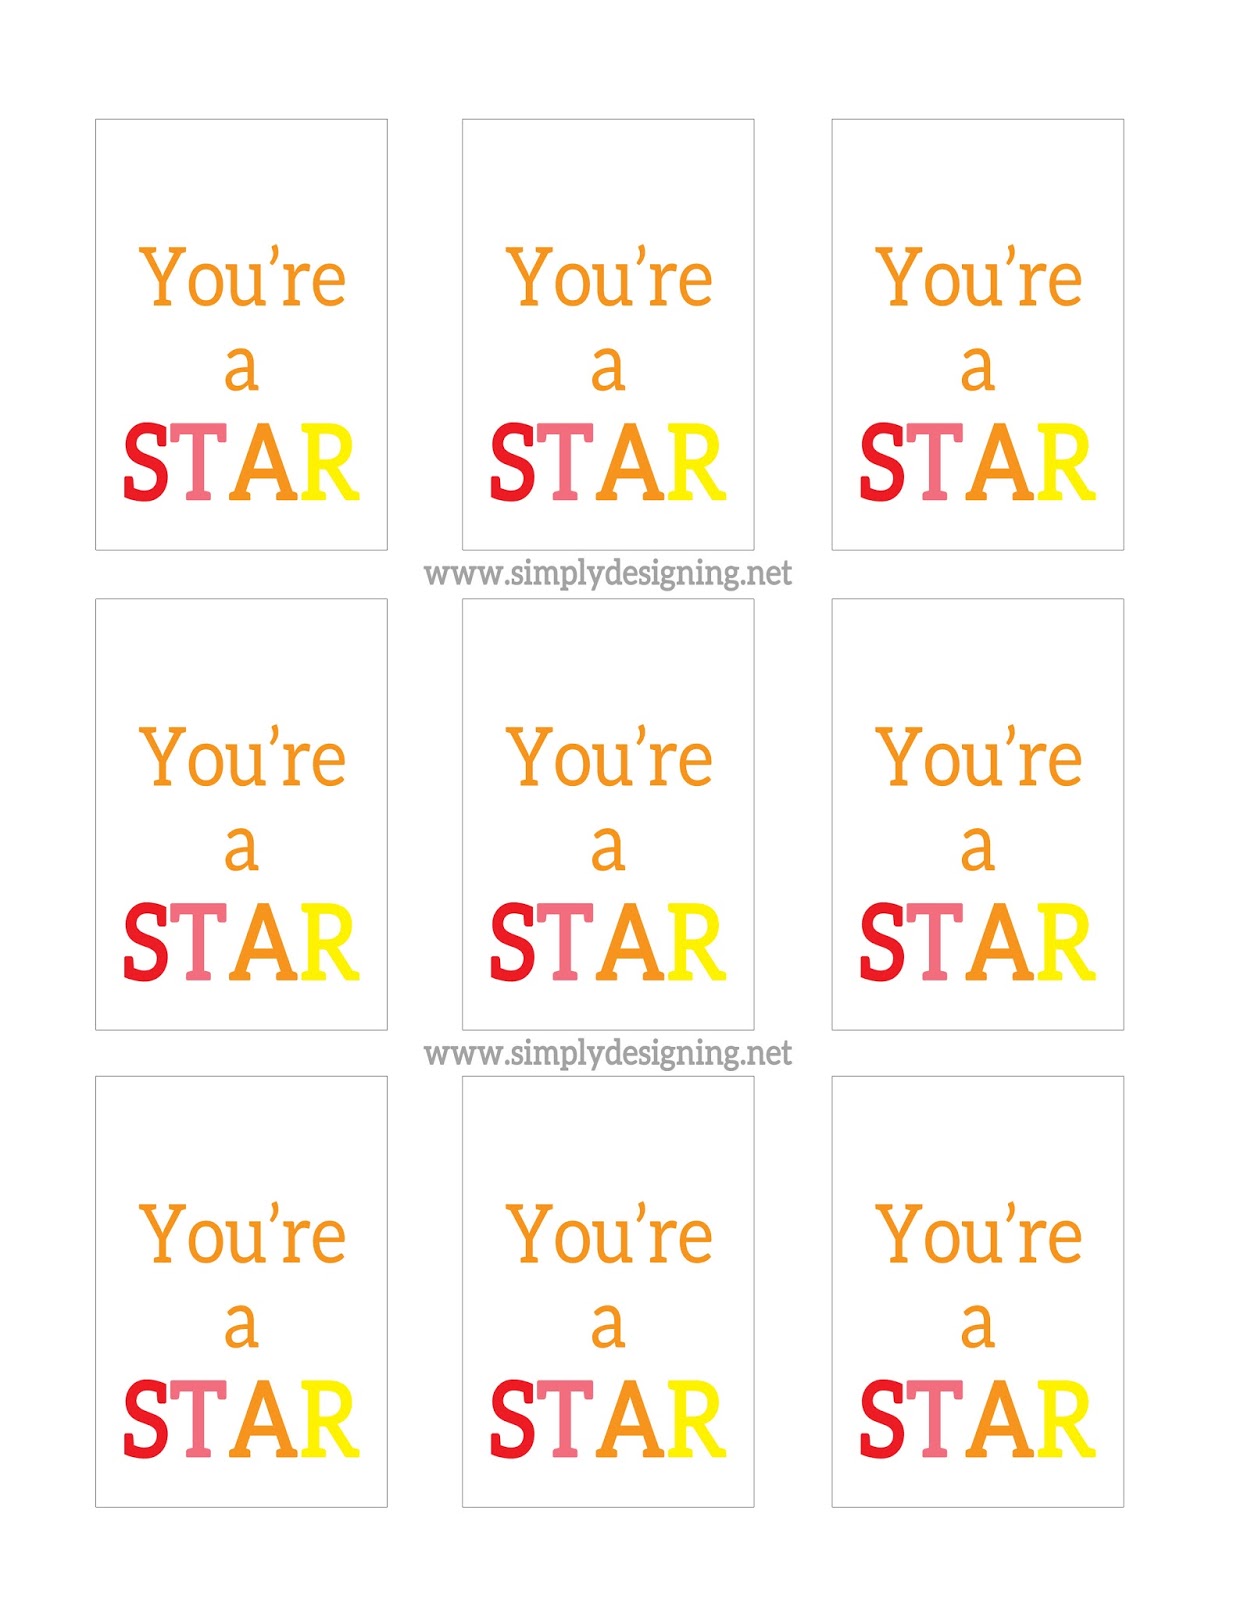 FREE PRINTABLE: Quick and Simple Gift Idea: You're A Star with FREE Printable | perfect quick gift idea for graduation, teacher appreciation, mother's day, father's day, recitals or end of the year programs! | It's really simple to put together and is so cute and customizable too!  | #DuckTape #HandmadeGift #Gift #Printable #spon